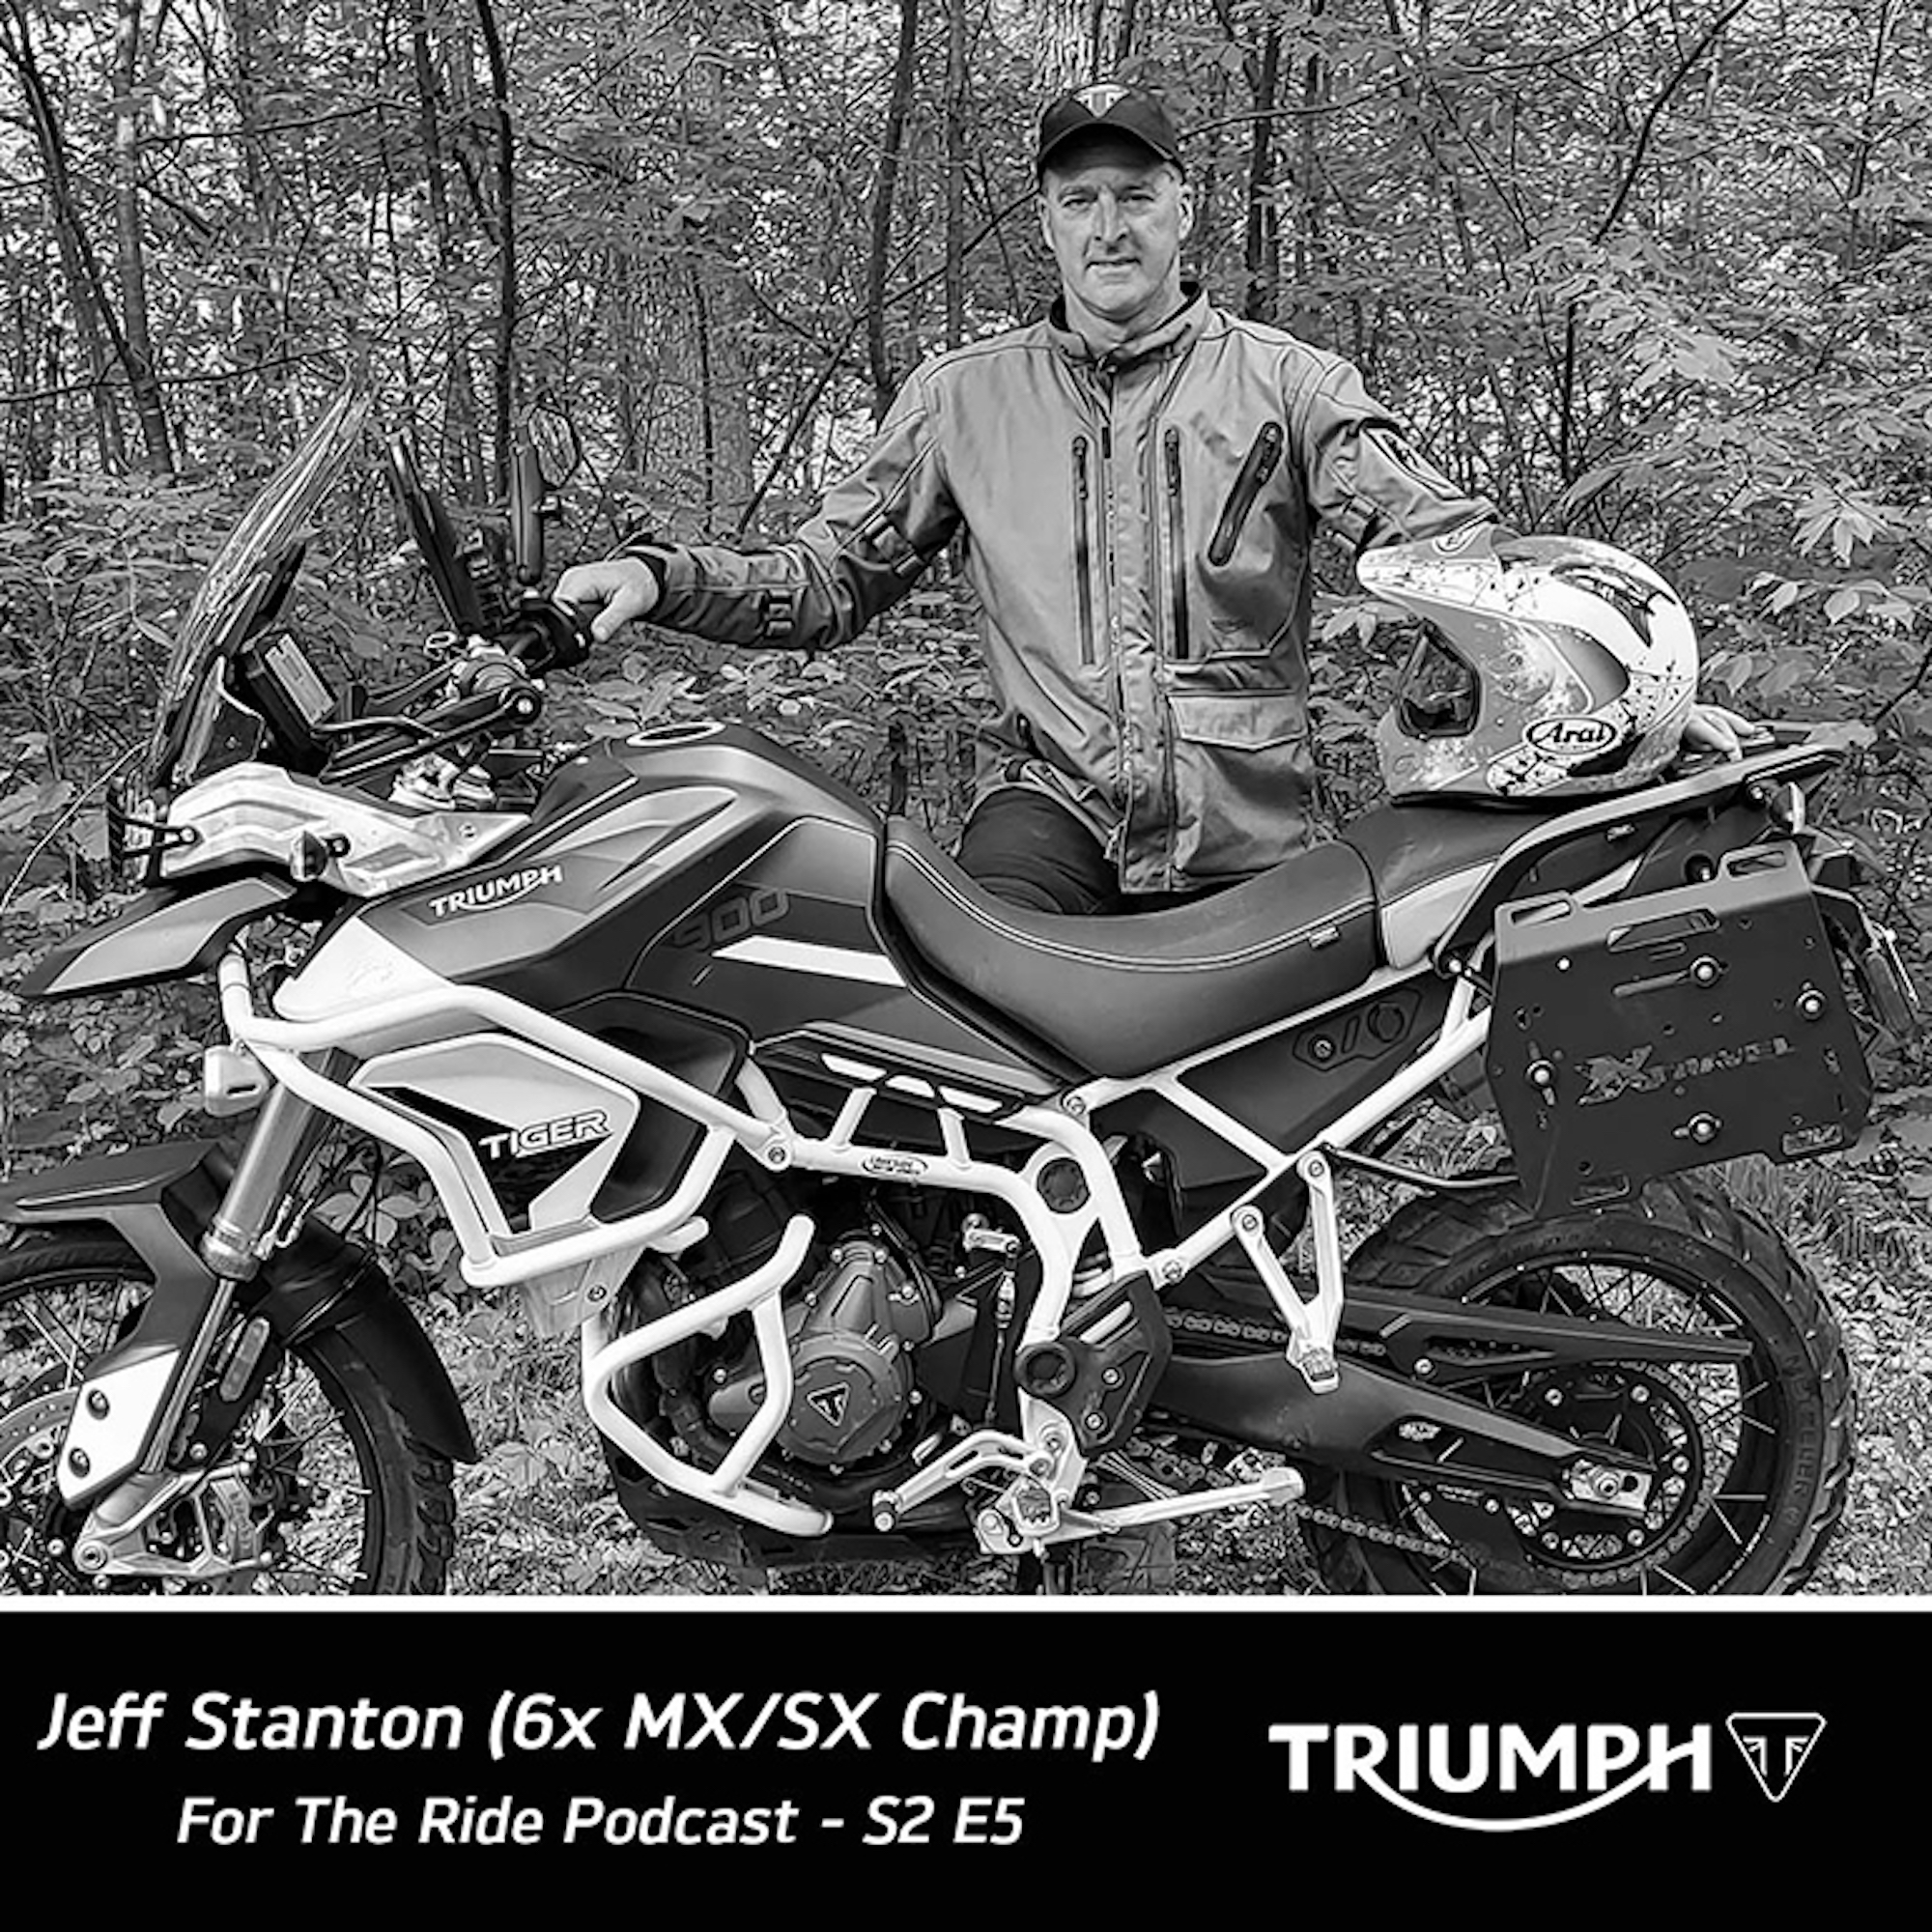 Celebrating Jeff Stanton Adventures as the first official 'Triumph accredited adventure partner.' Media sourced from Triumph. 